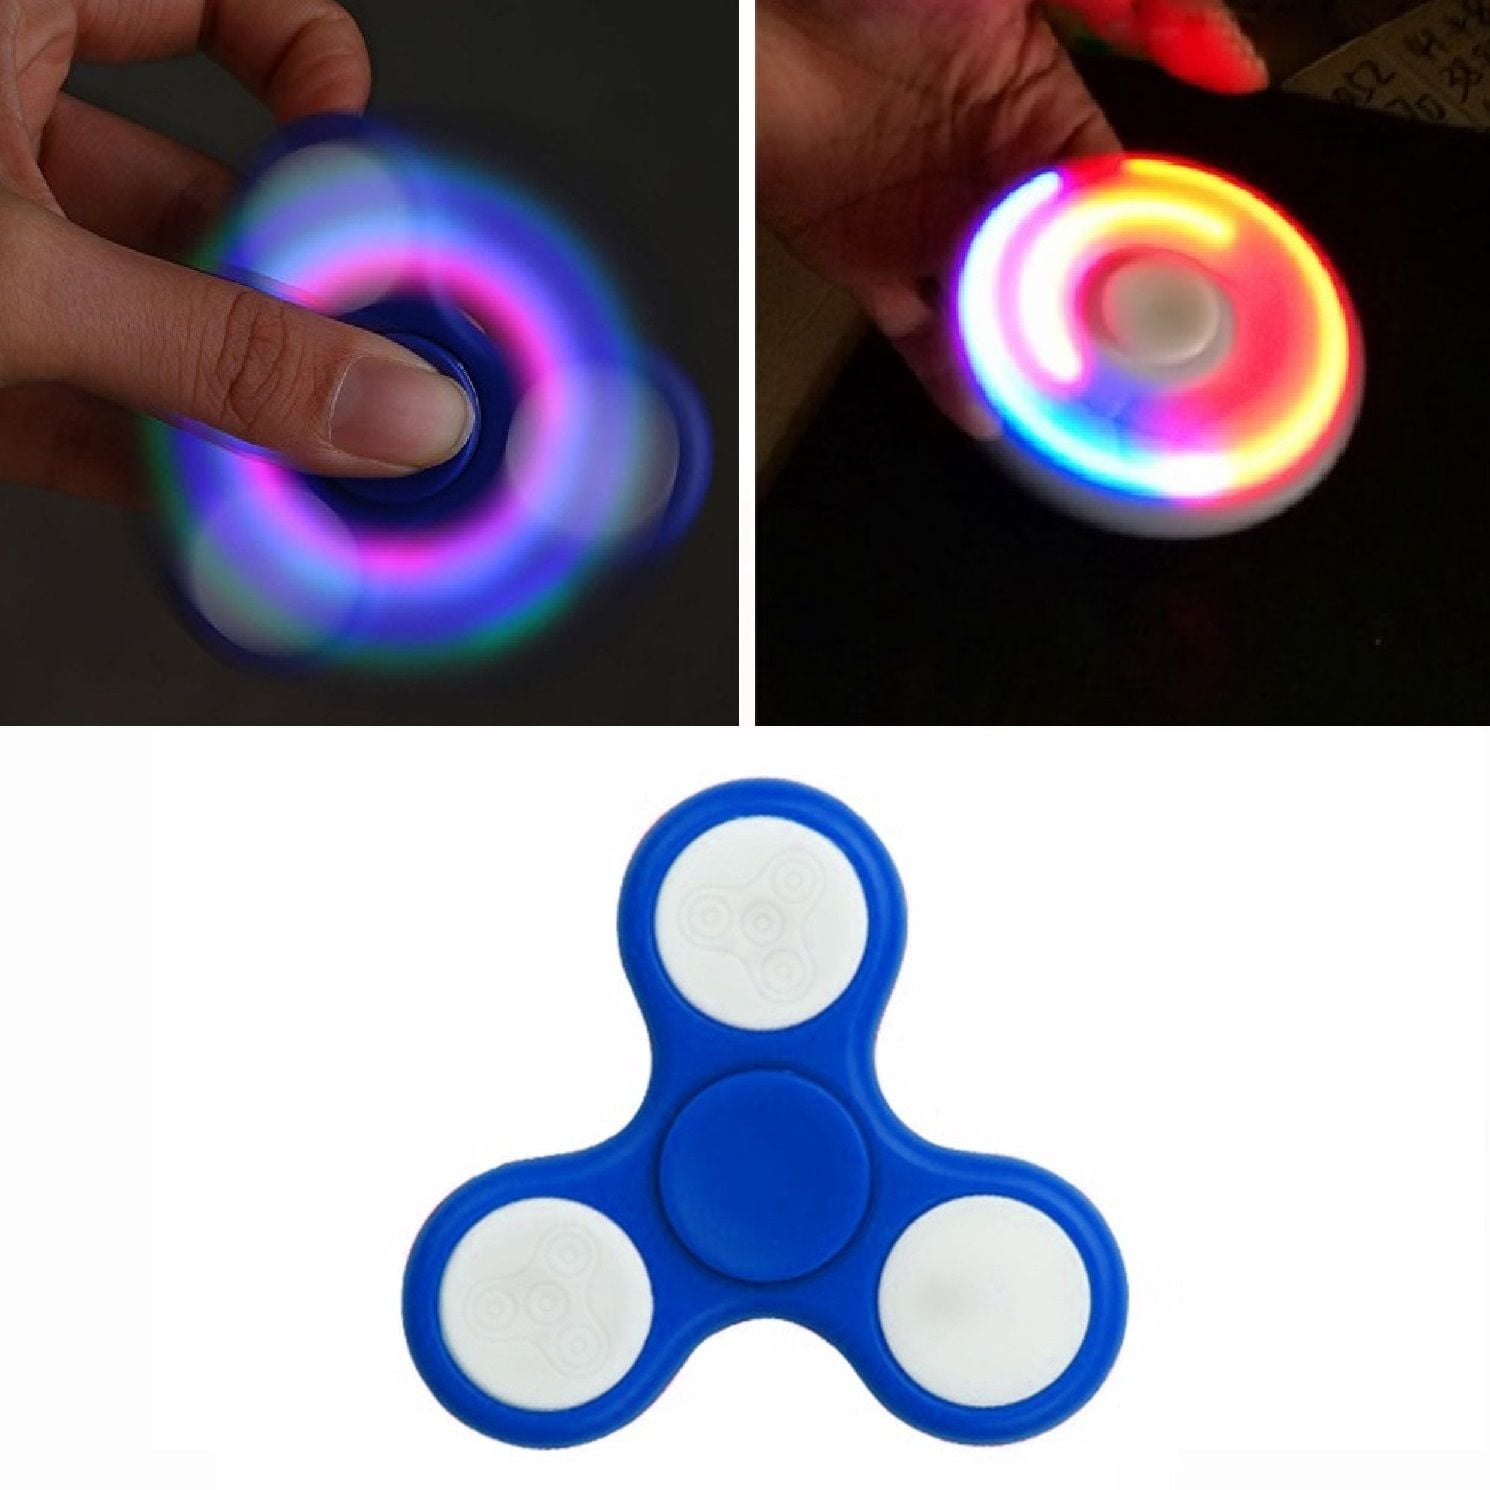 . Light Red Anxiety Syslux Tri-Spinner Fidget Spinner Toy Hand Spinner Glow In The Dark Fluorescence and Autism Adult Children ADHD Perfect For ADD